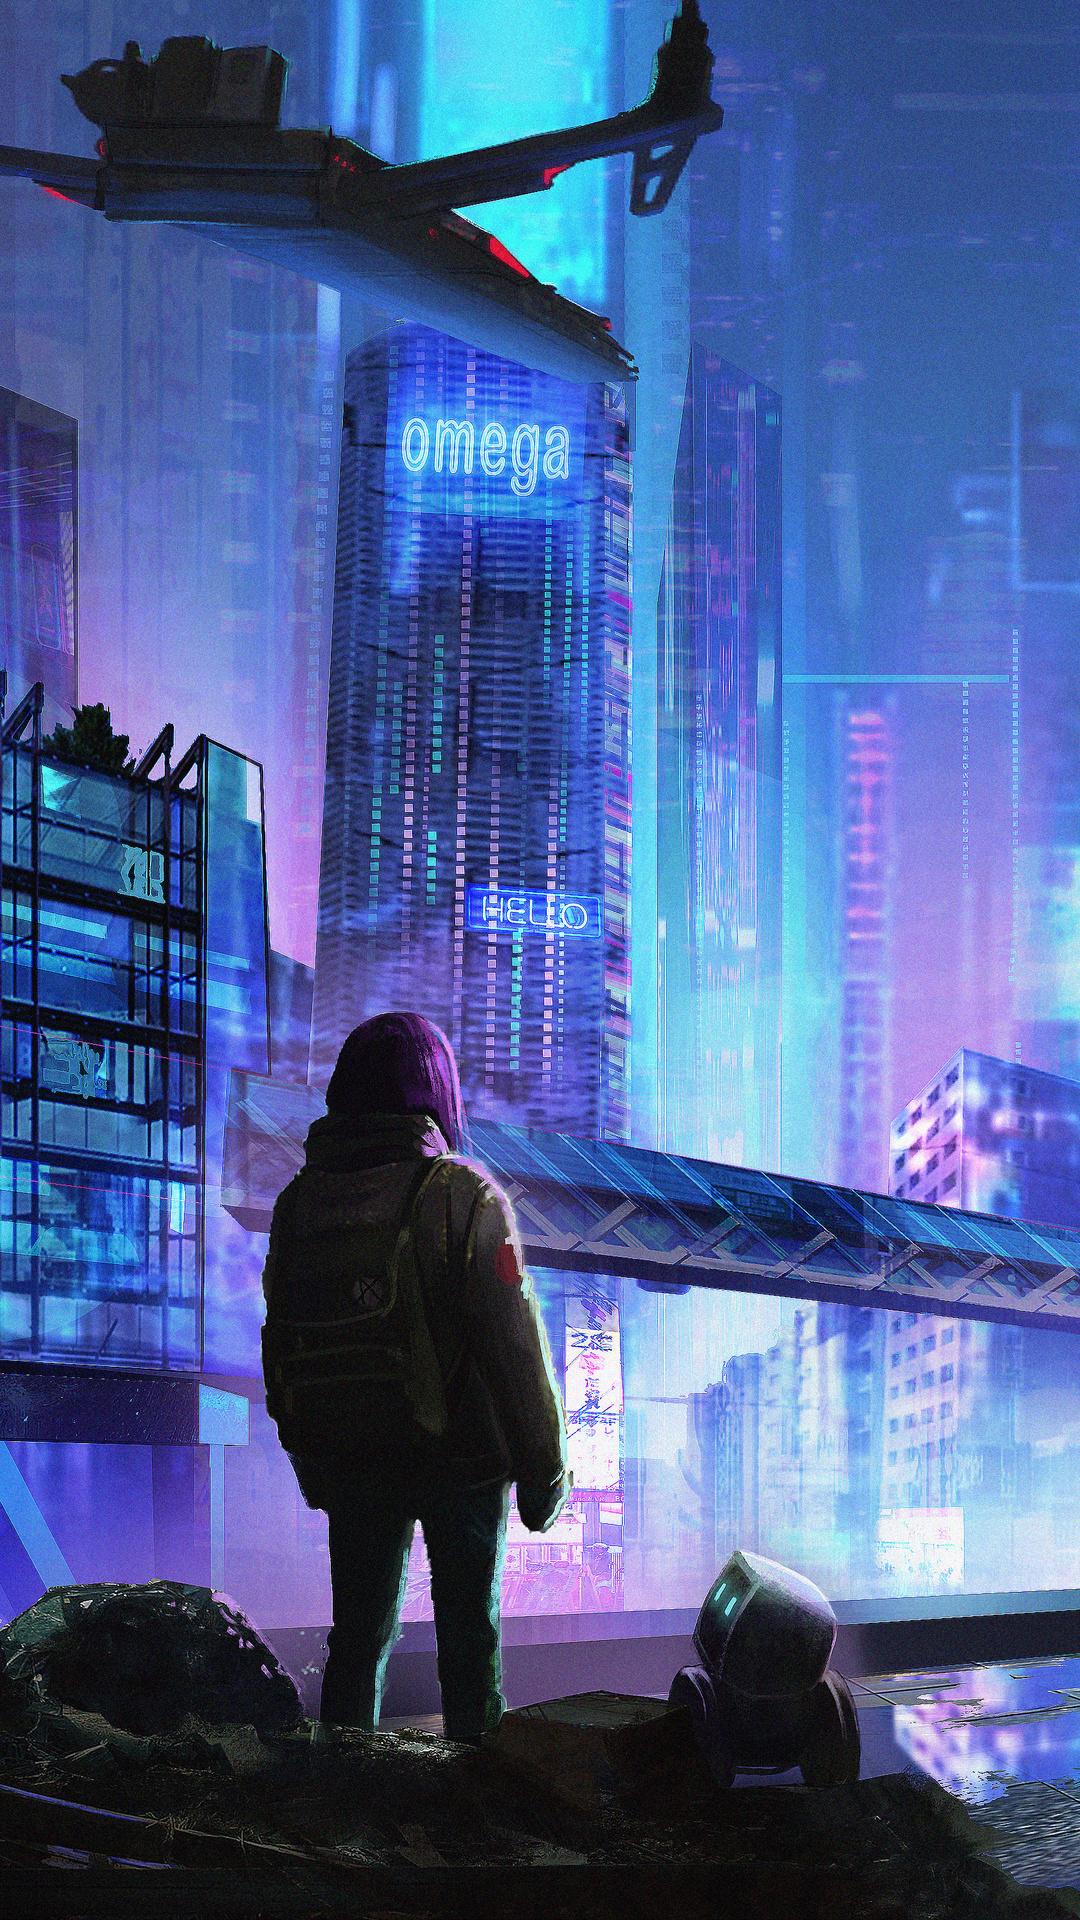 Cyberpunk Wallpaper Hd 4k 21 For Android Apk Download